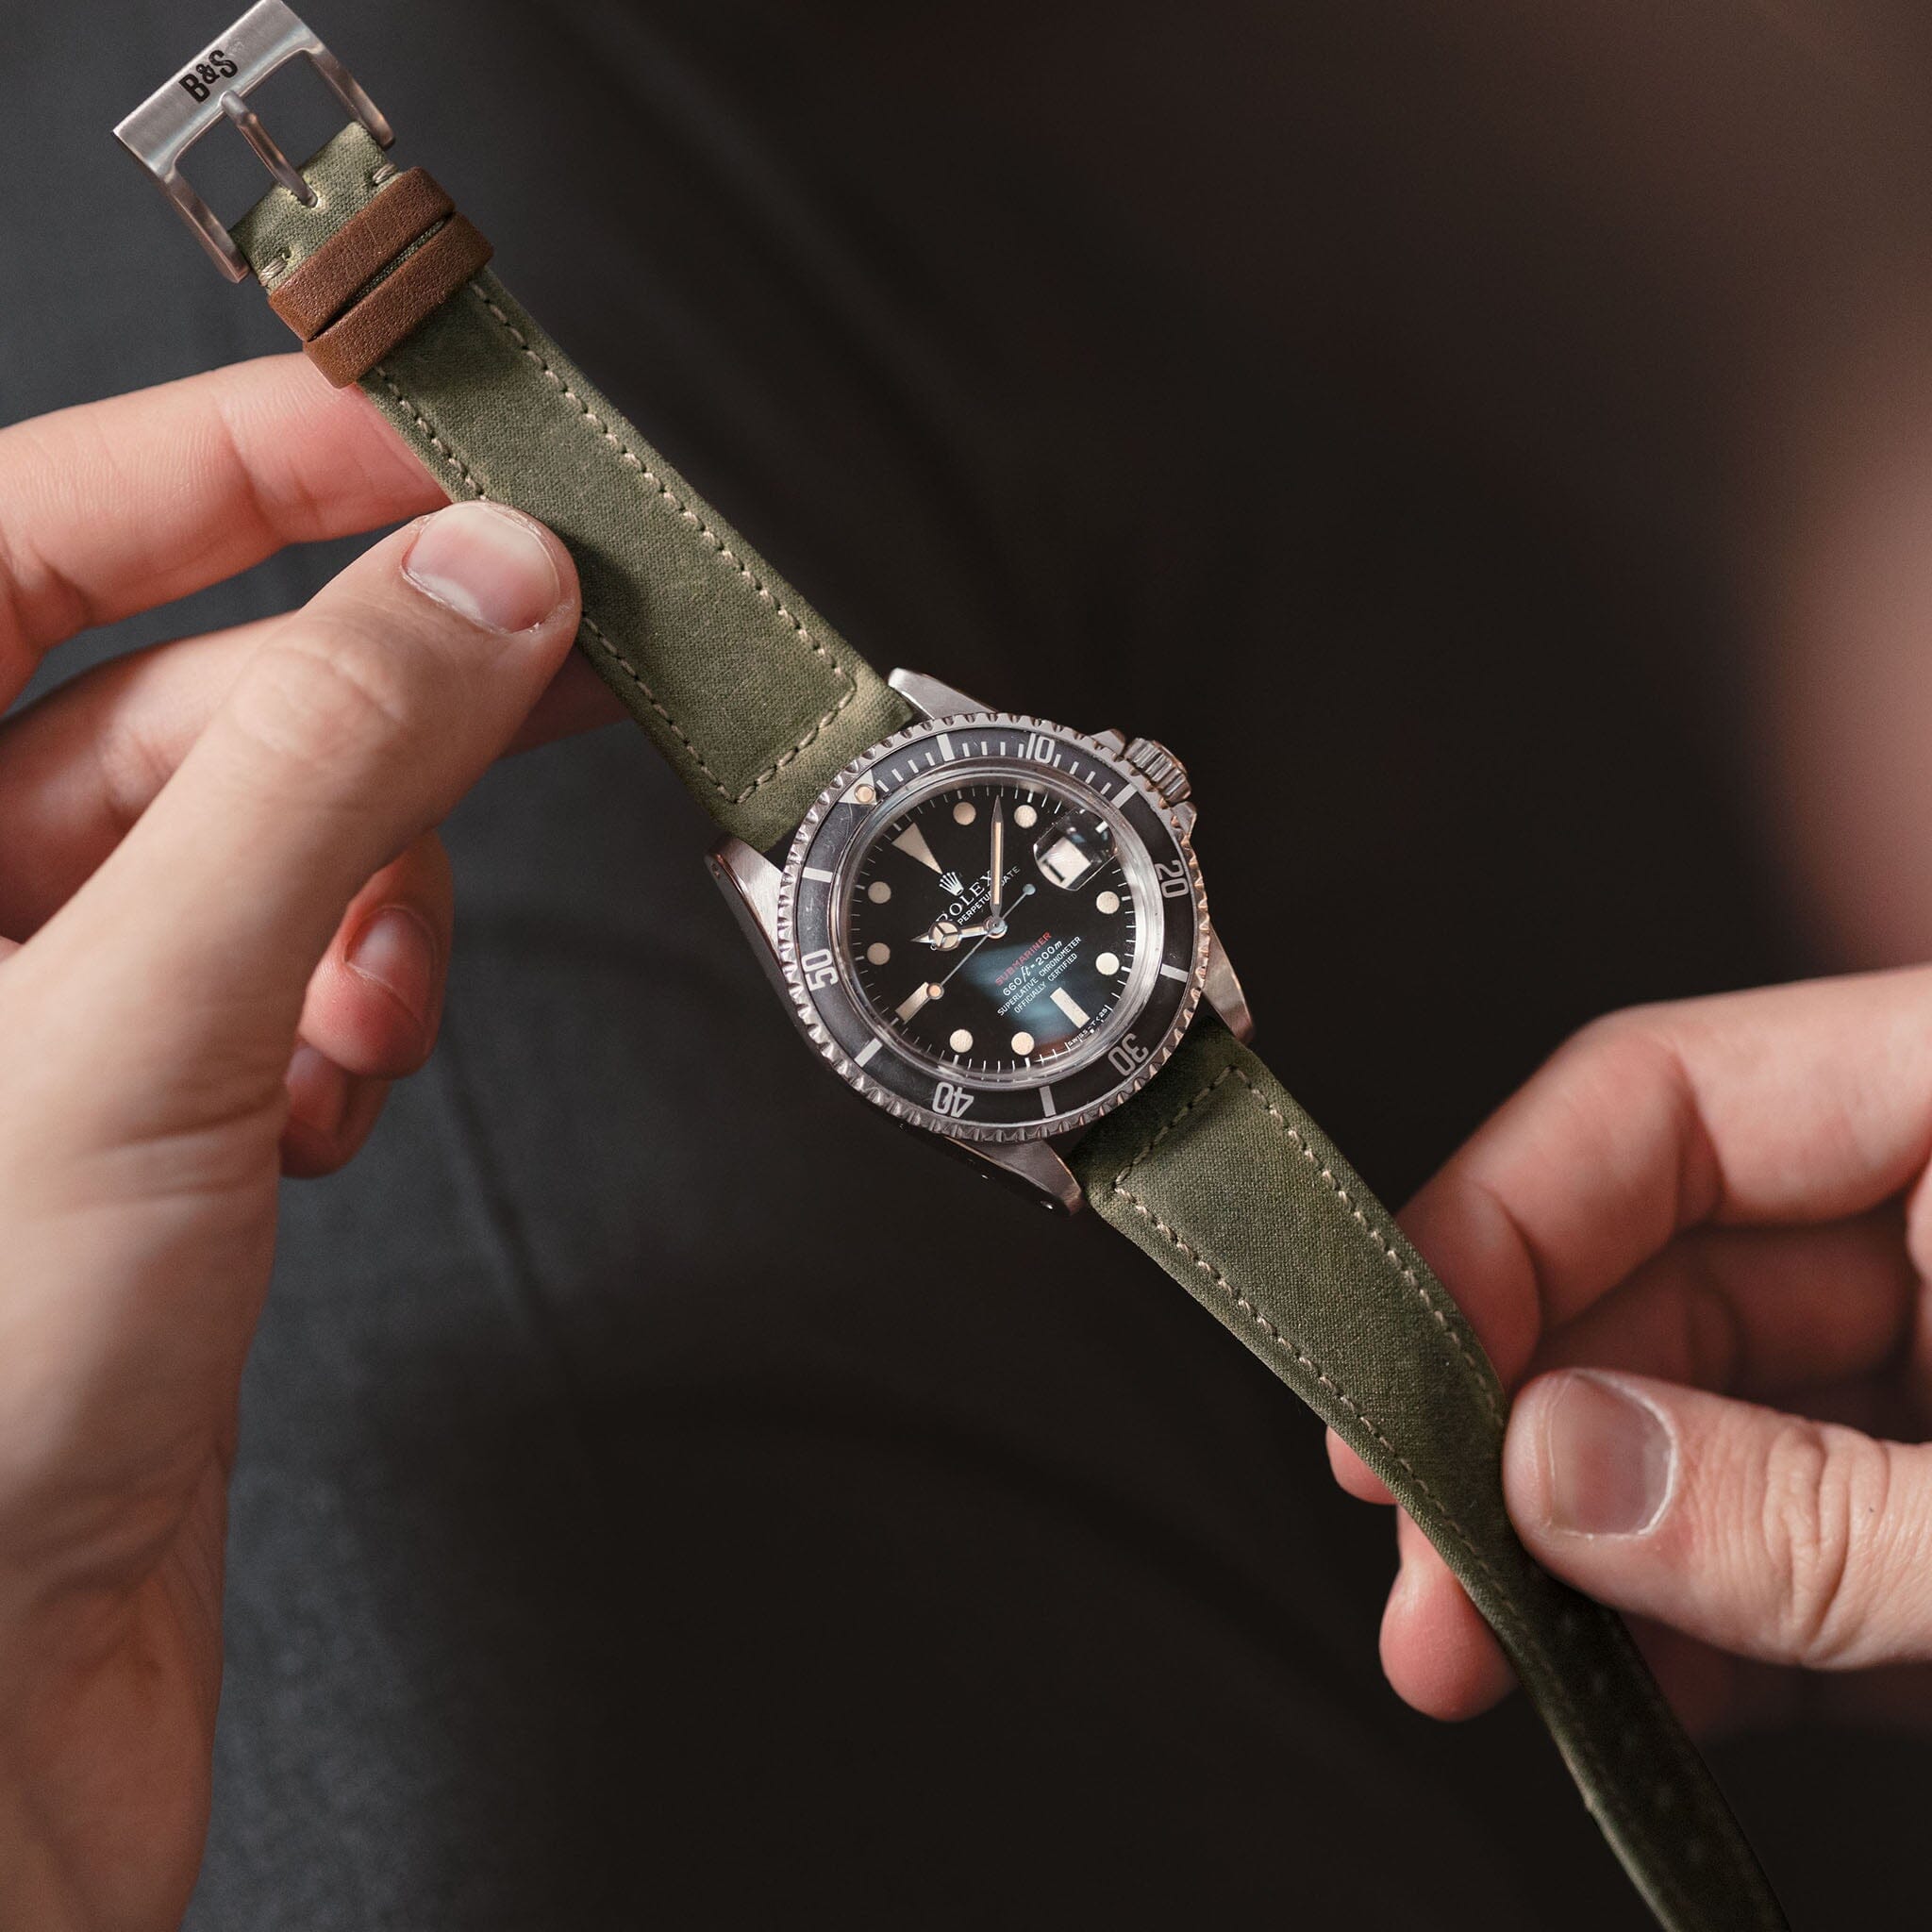 The Highlands Watch Strap - Made of Vintage Barbour Fabric - Jubilee Edition